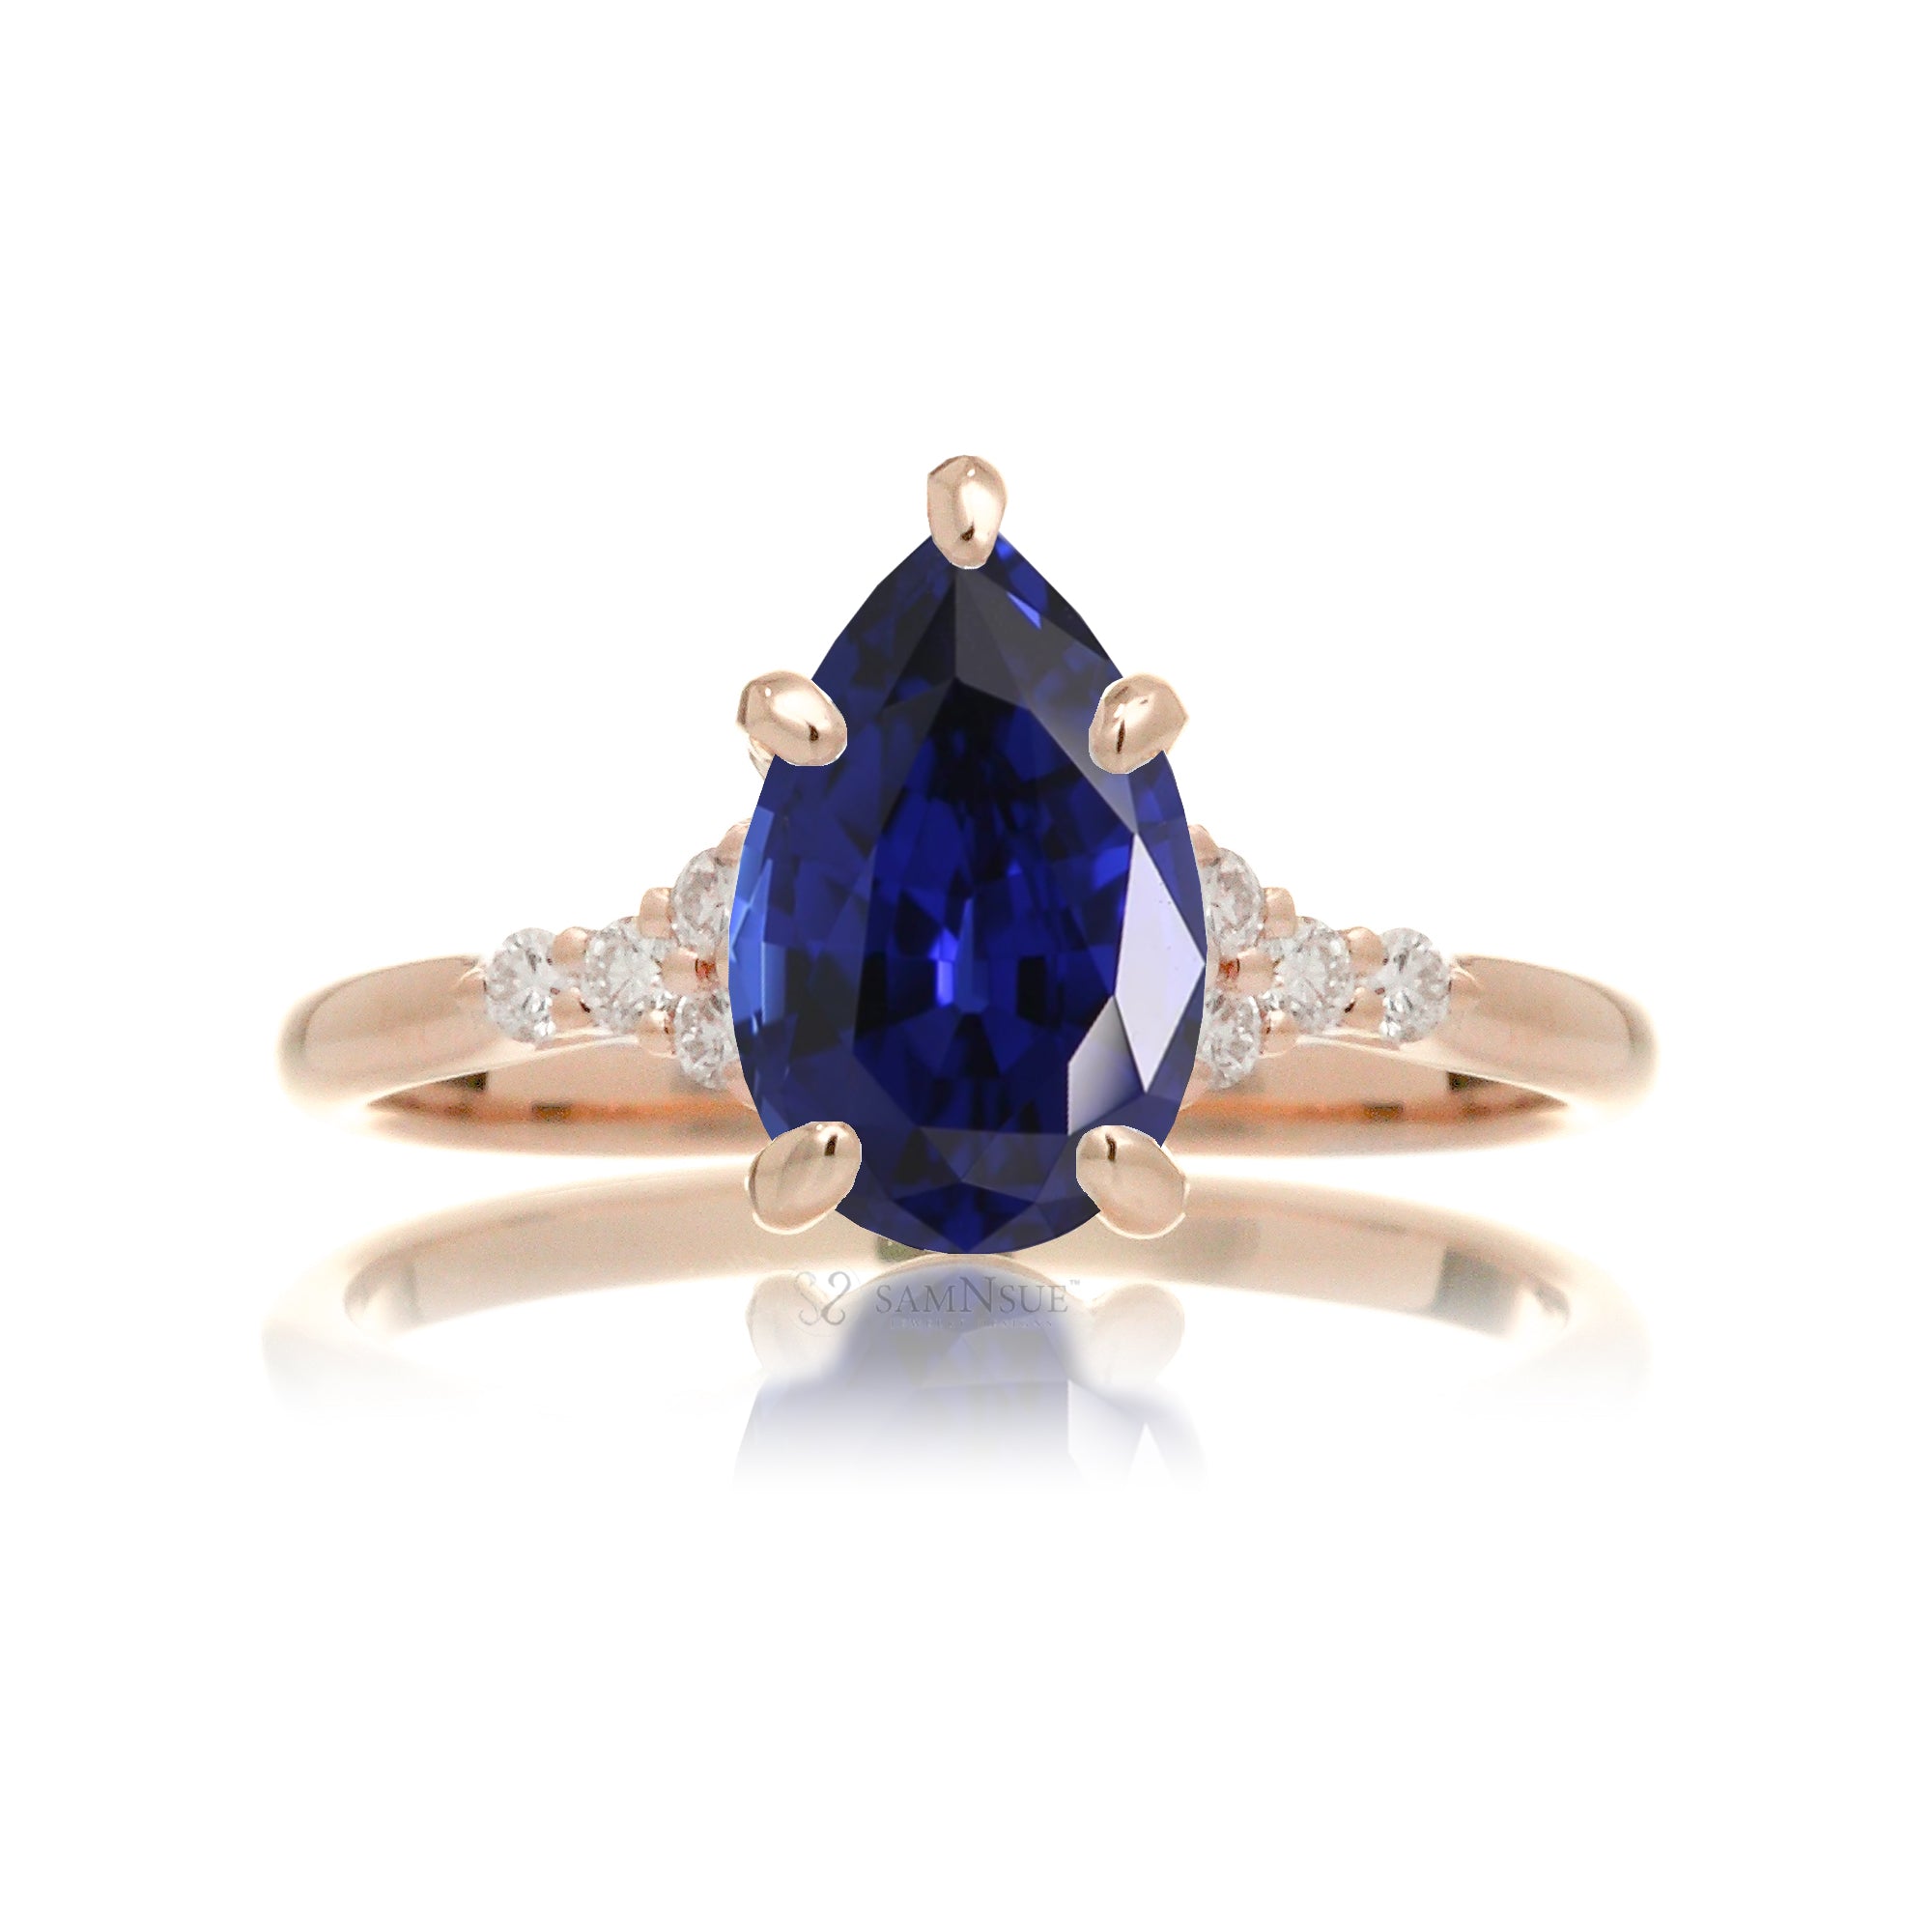 Pear shape blue sapphire diamond ring in rose gold - the Chloe lab-grown